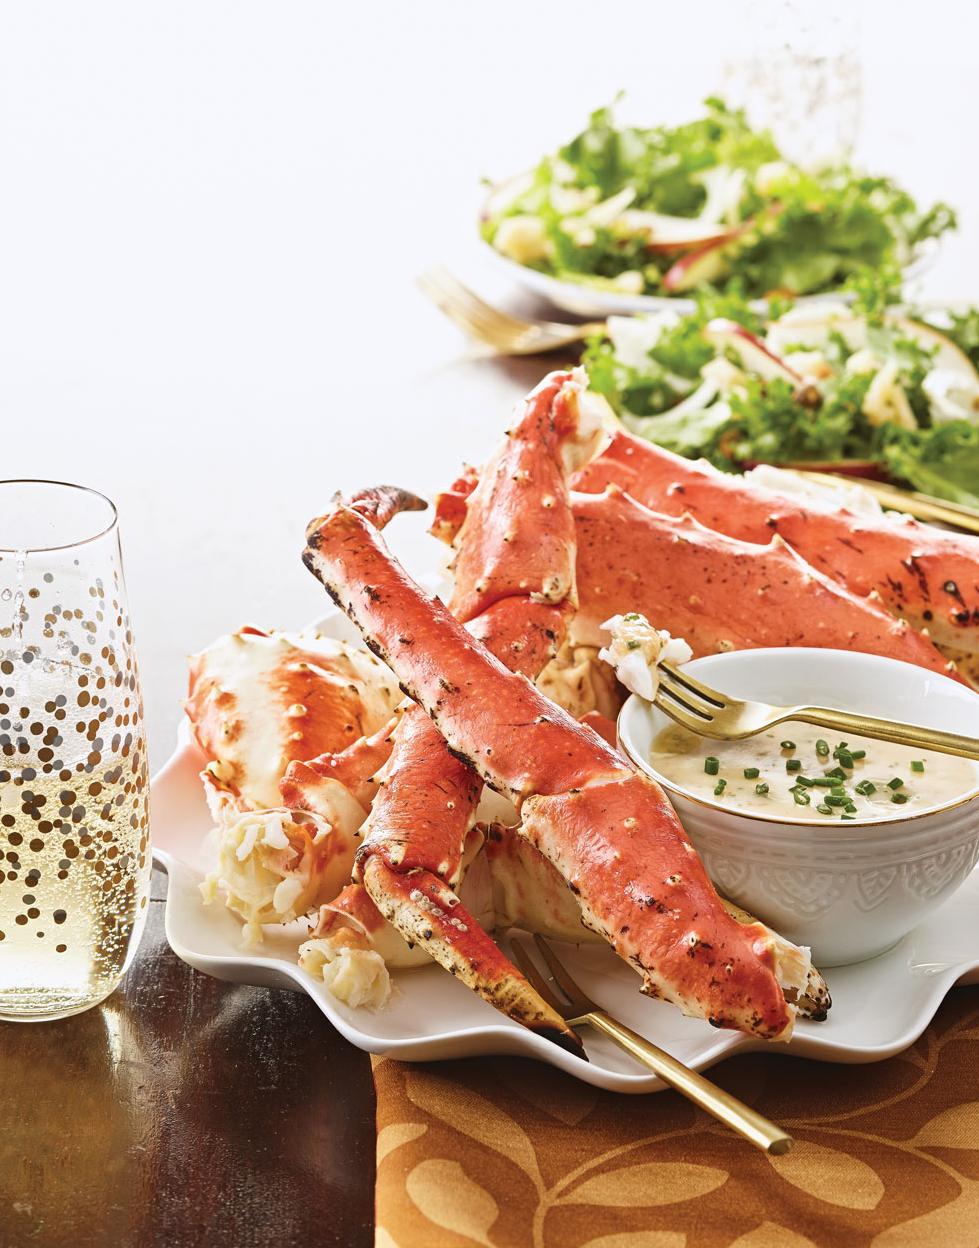  Elevate your seafood game with this mouthwatering combo of crab legs and wine.